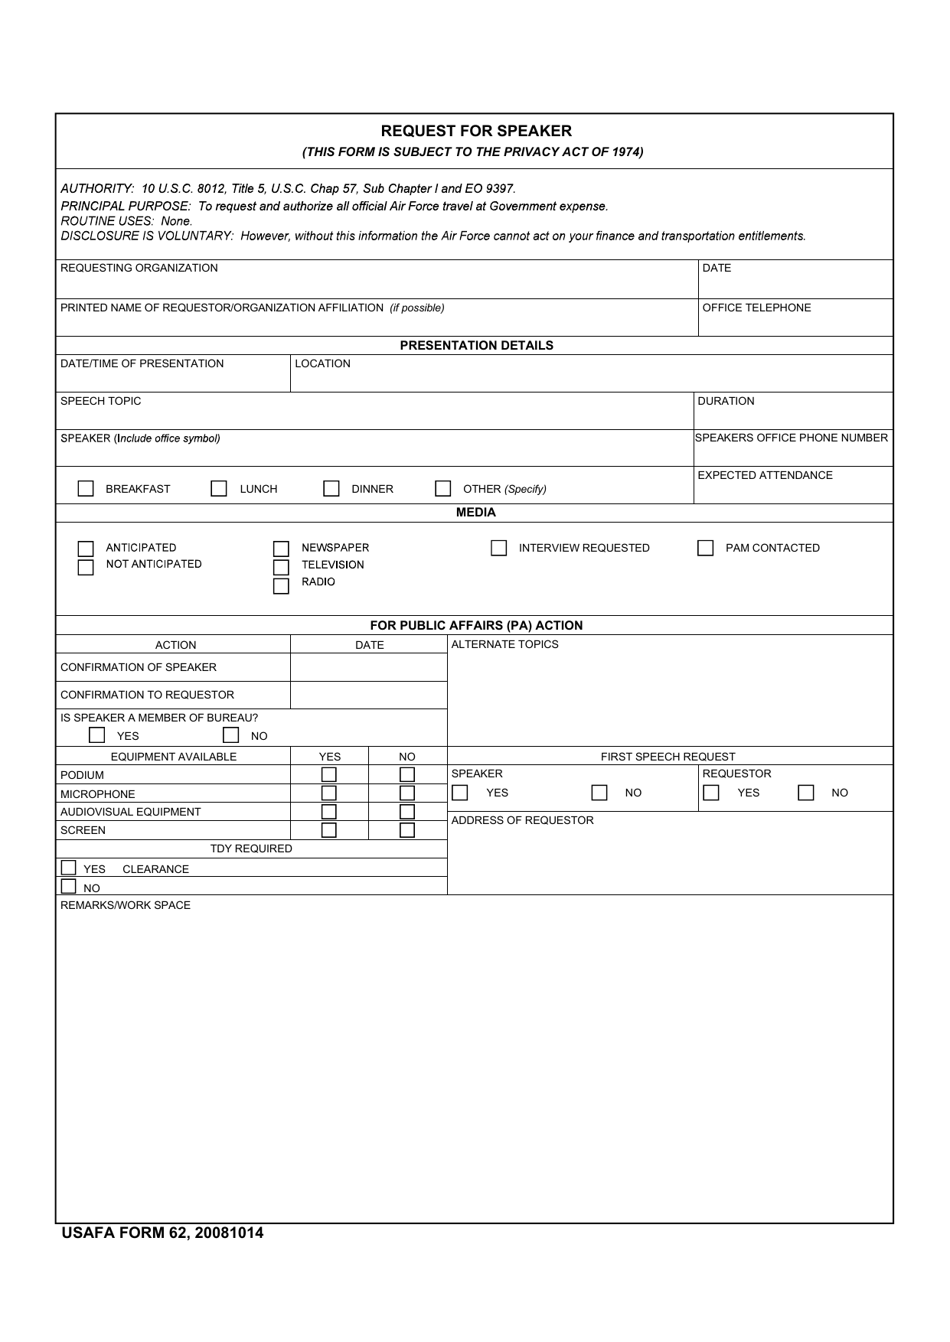 USAFA Form 62 Request for Speaker, Page 1